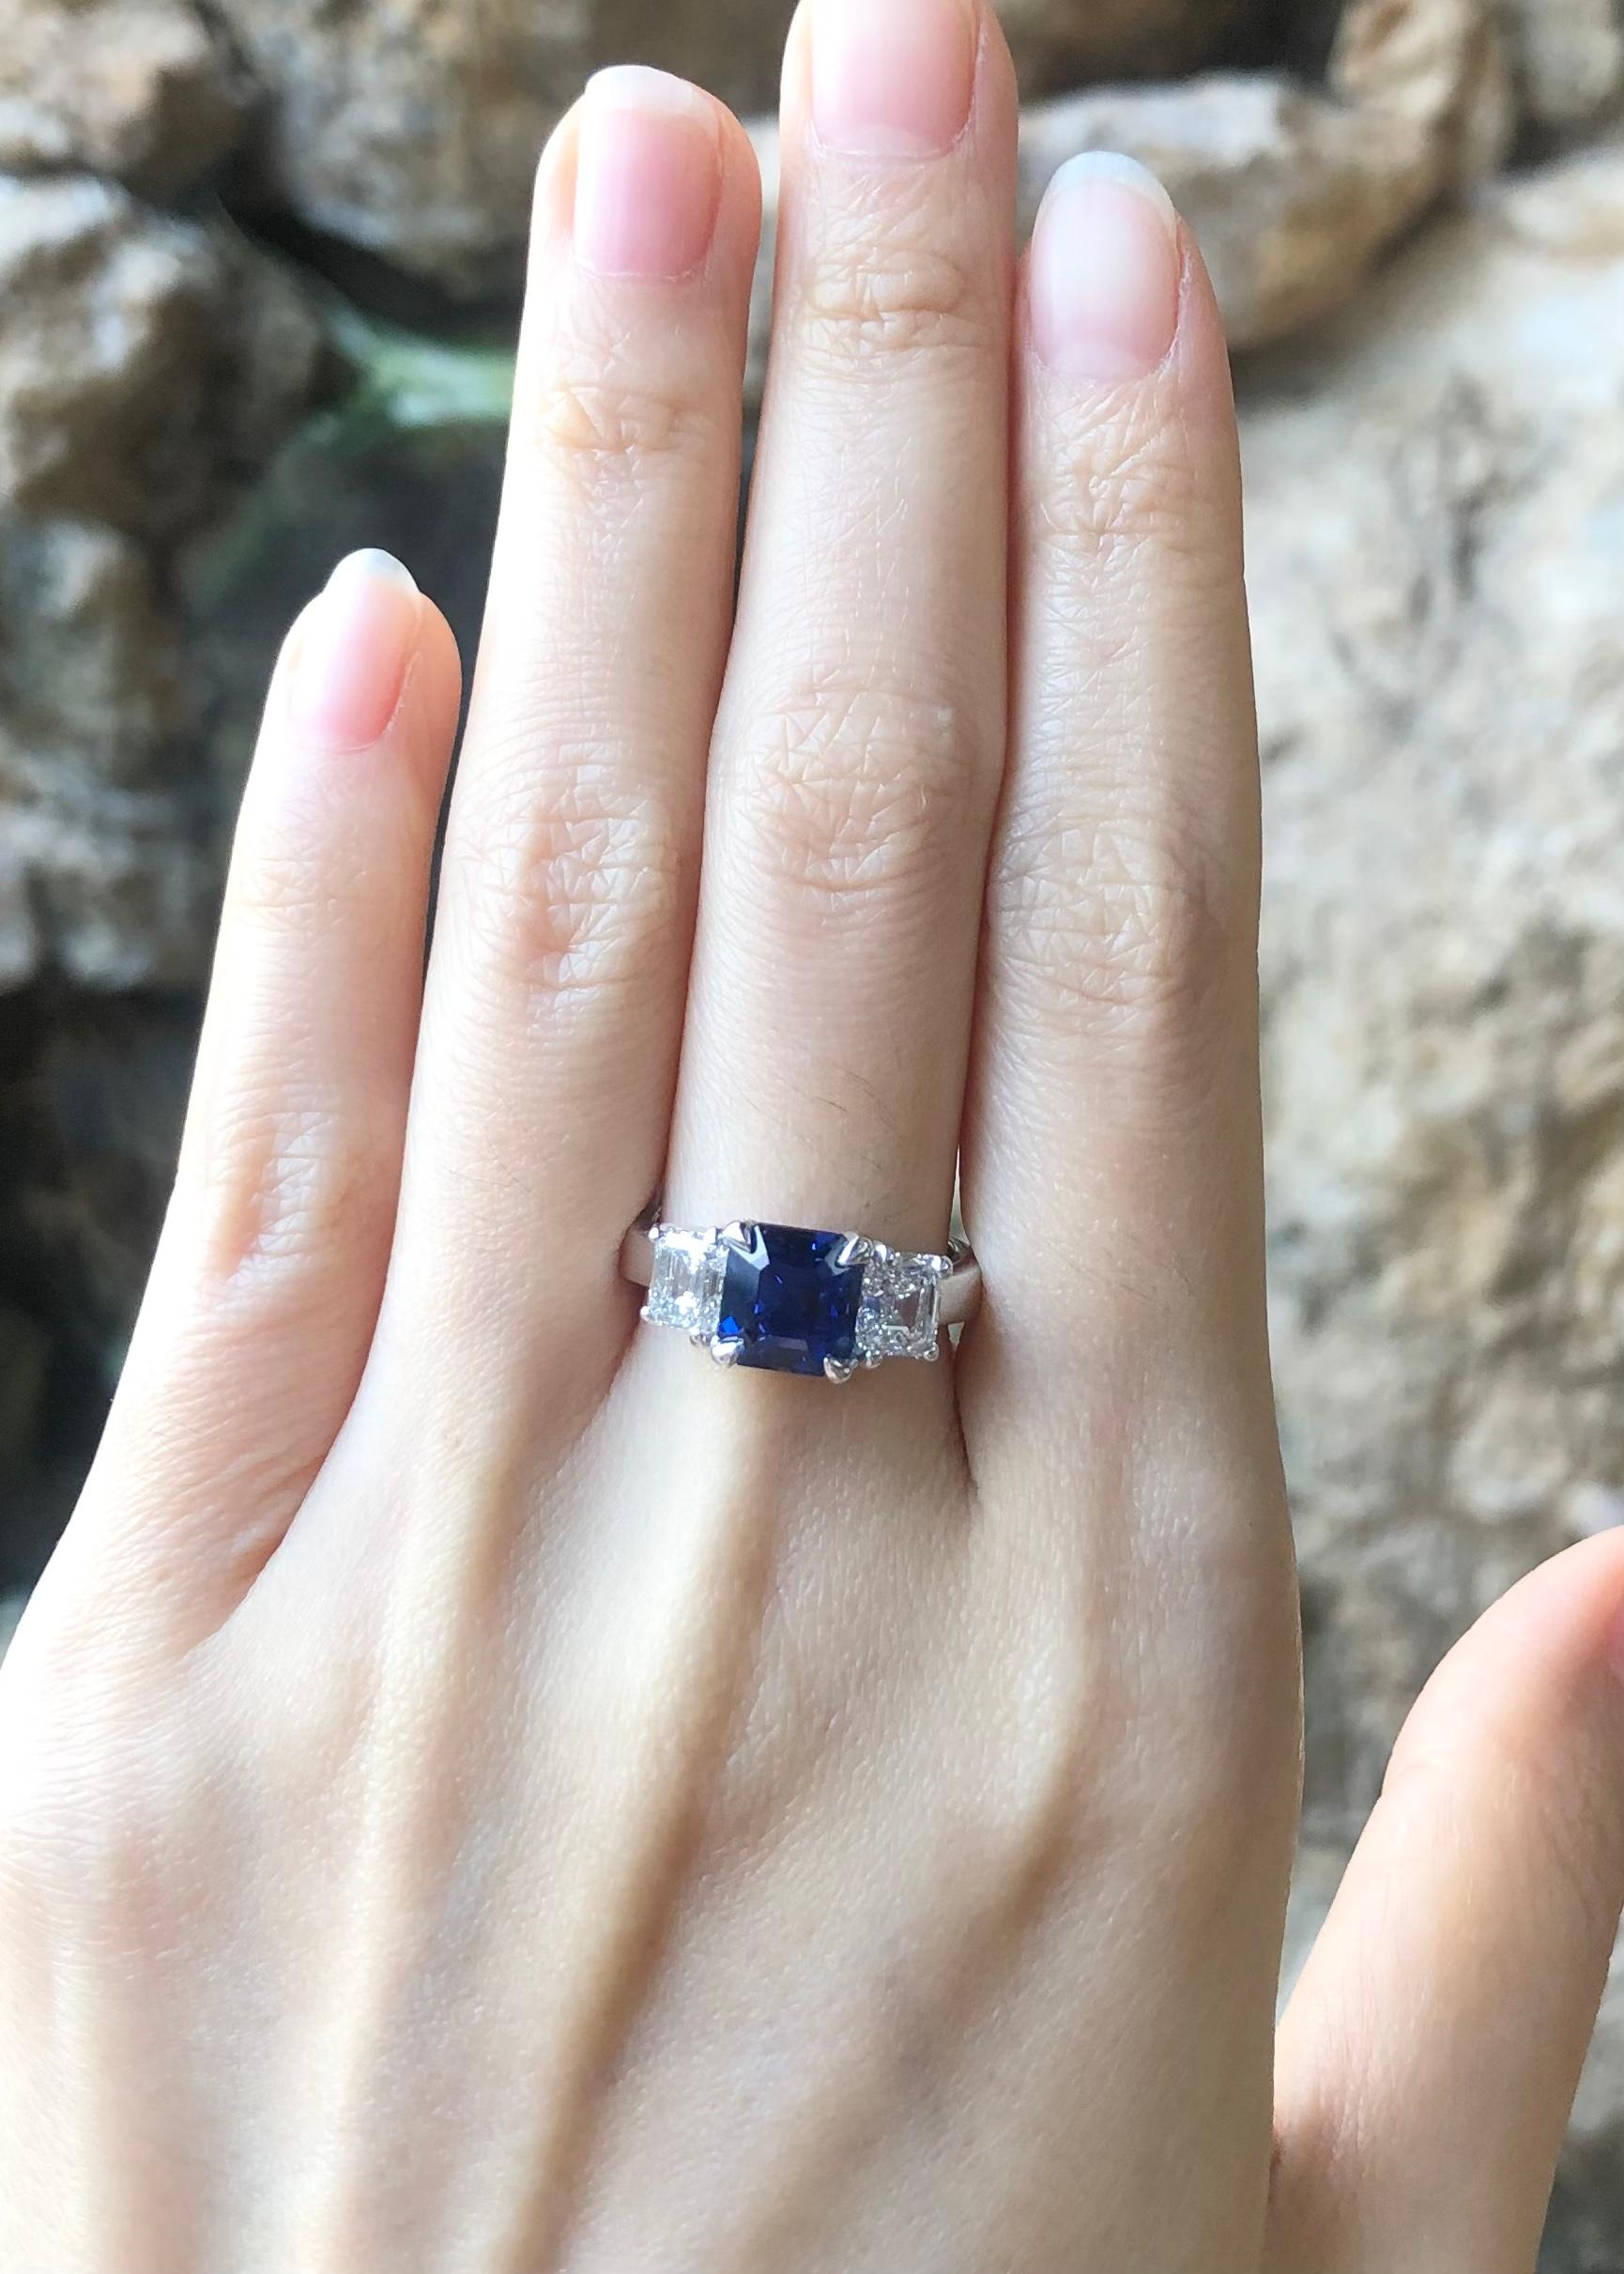 Blue Sapphire 3.41 carats with Diamond 1.48 carats Ring set in Platinum 950 Settings

Width:  1.5 cm 
Length: 0.7 cm
Ring Size: 53
Total Weight: 10.0 grams

